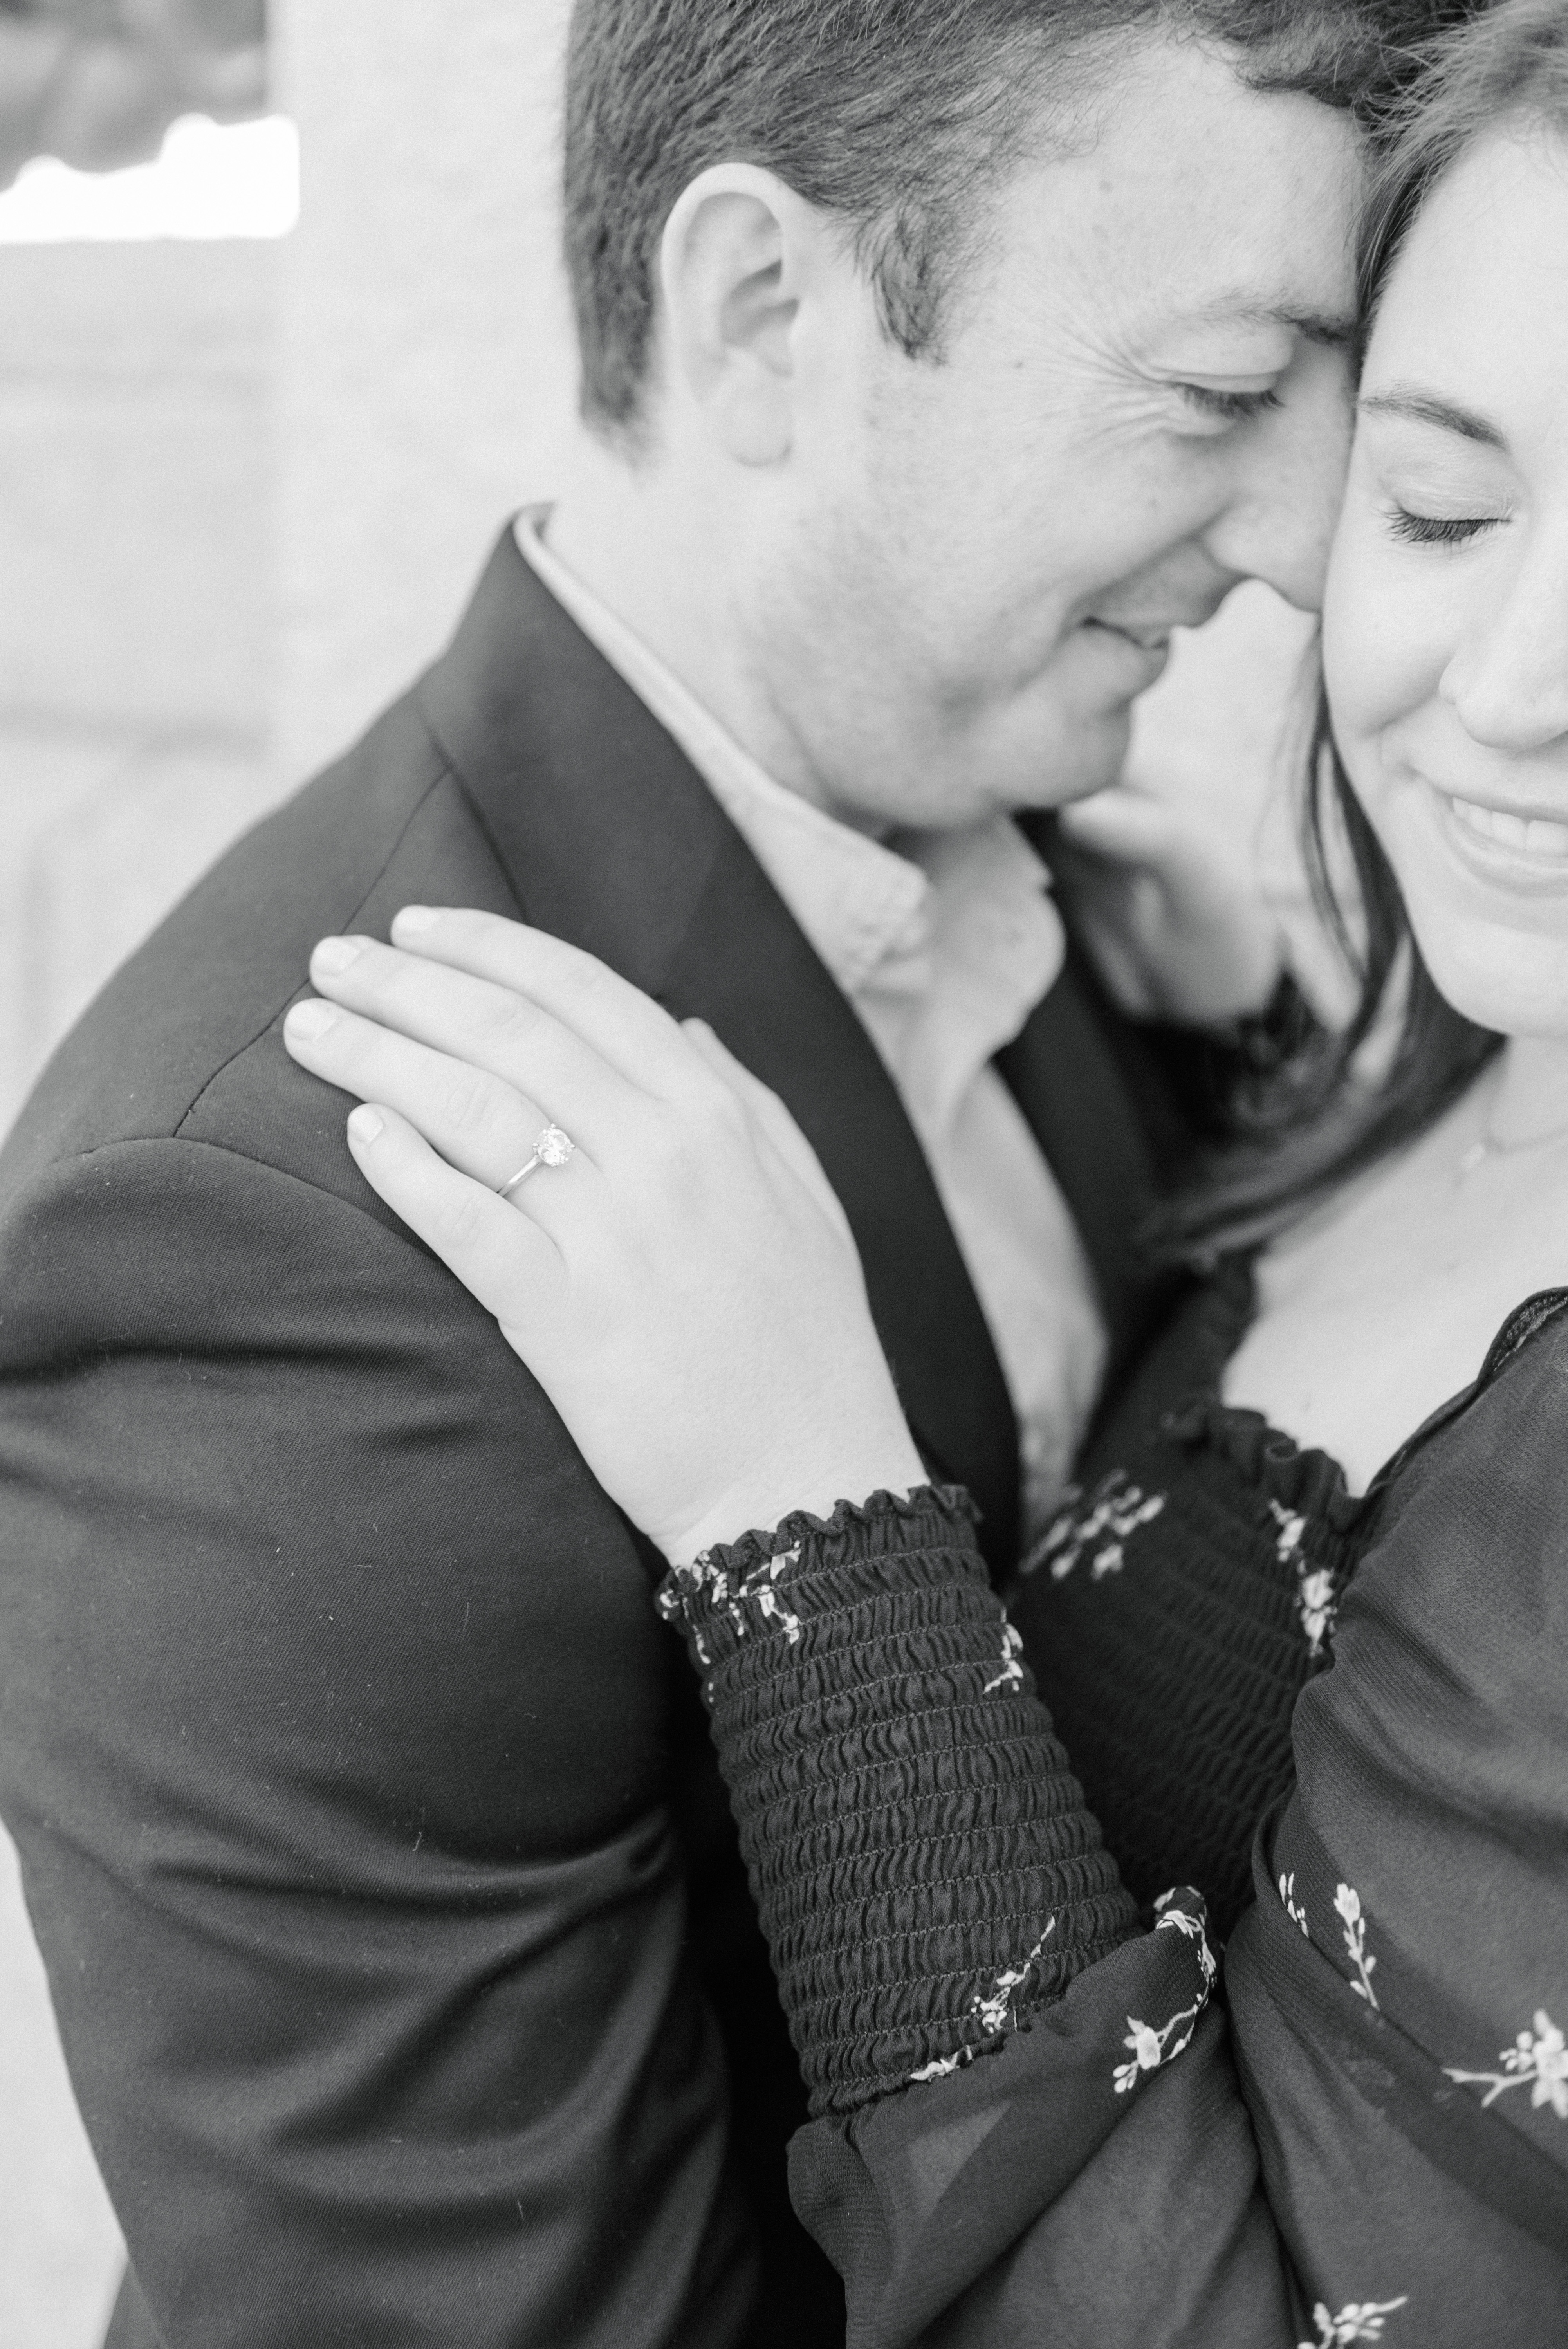 I am an engagement photographer and spent time in Washington D.C. with this beautiful couple.